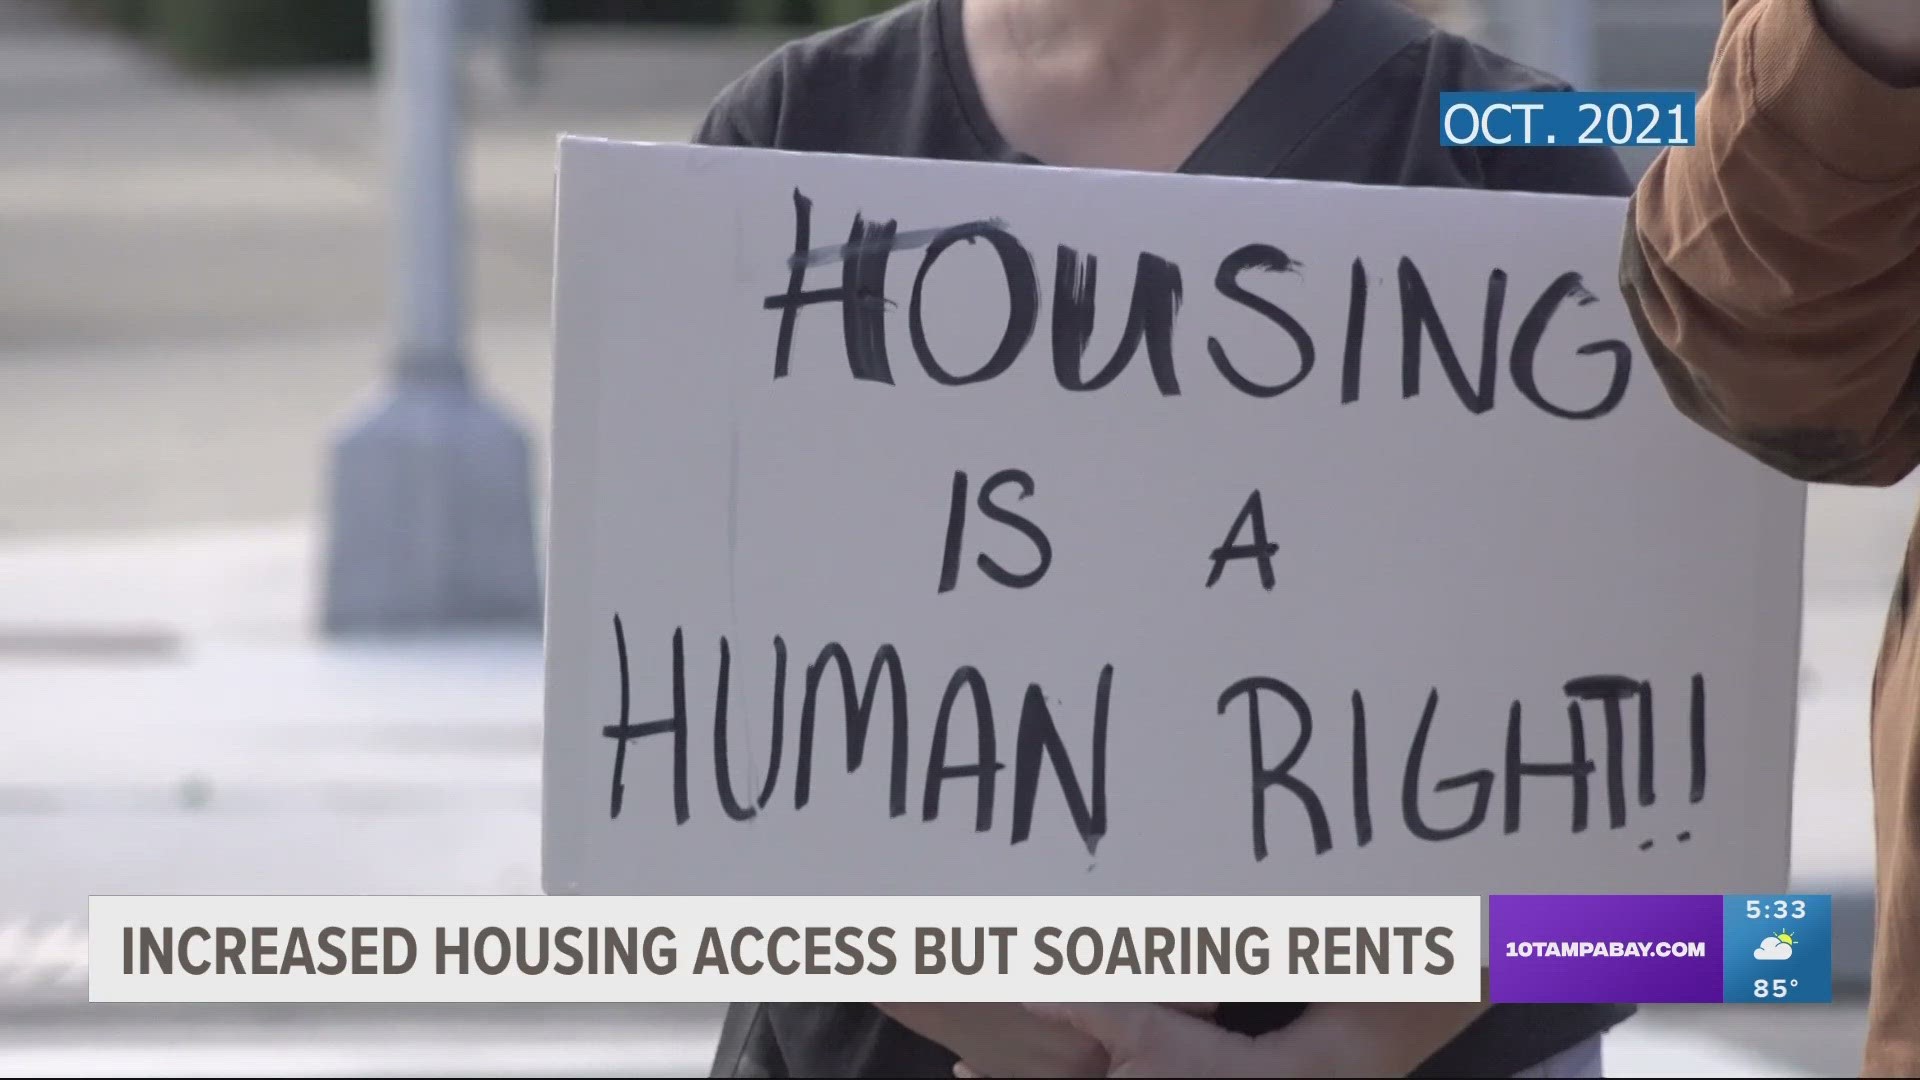 Gov. Ron DeSantis signed a bill into law aimed at increasing access to affordable housing. Critics say it hurts renters.